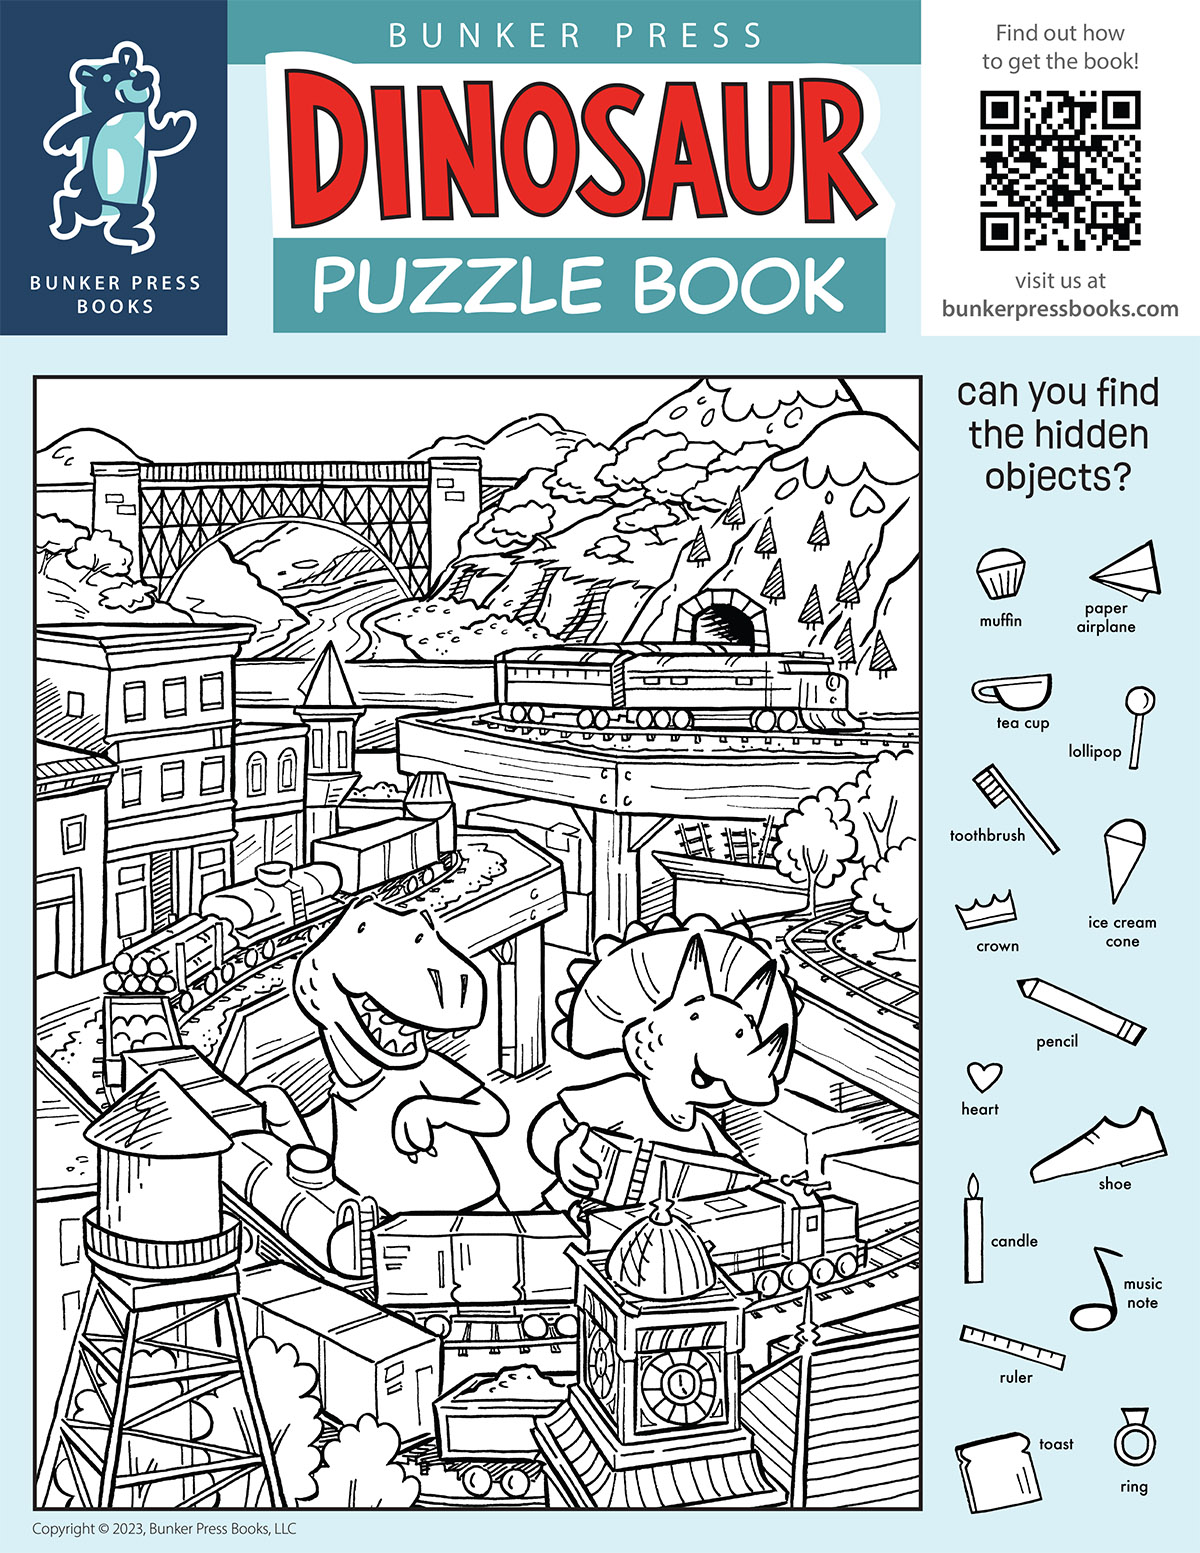 Dinosaurs playing with trains sample puzzle